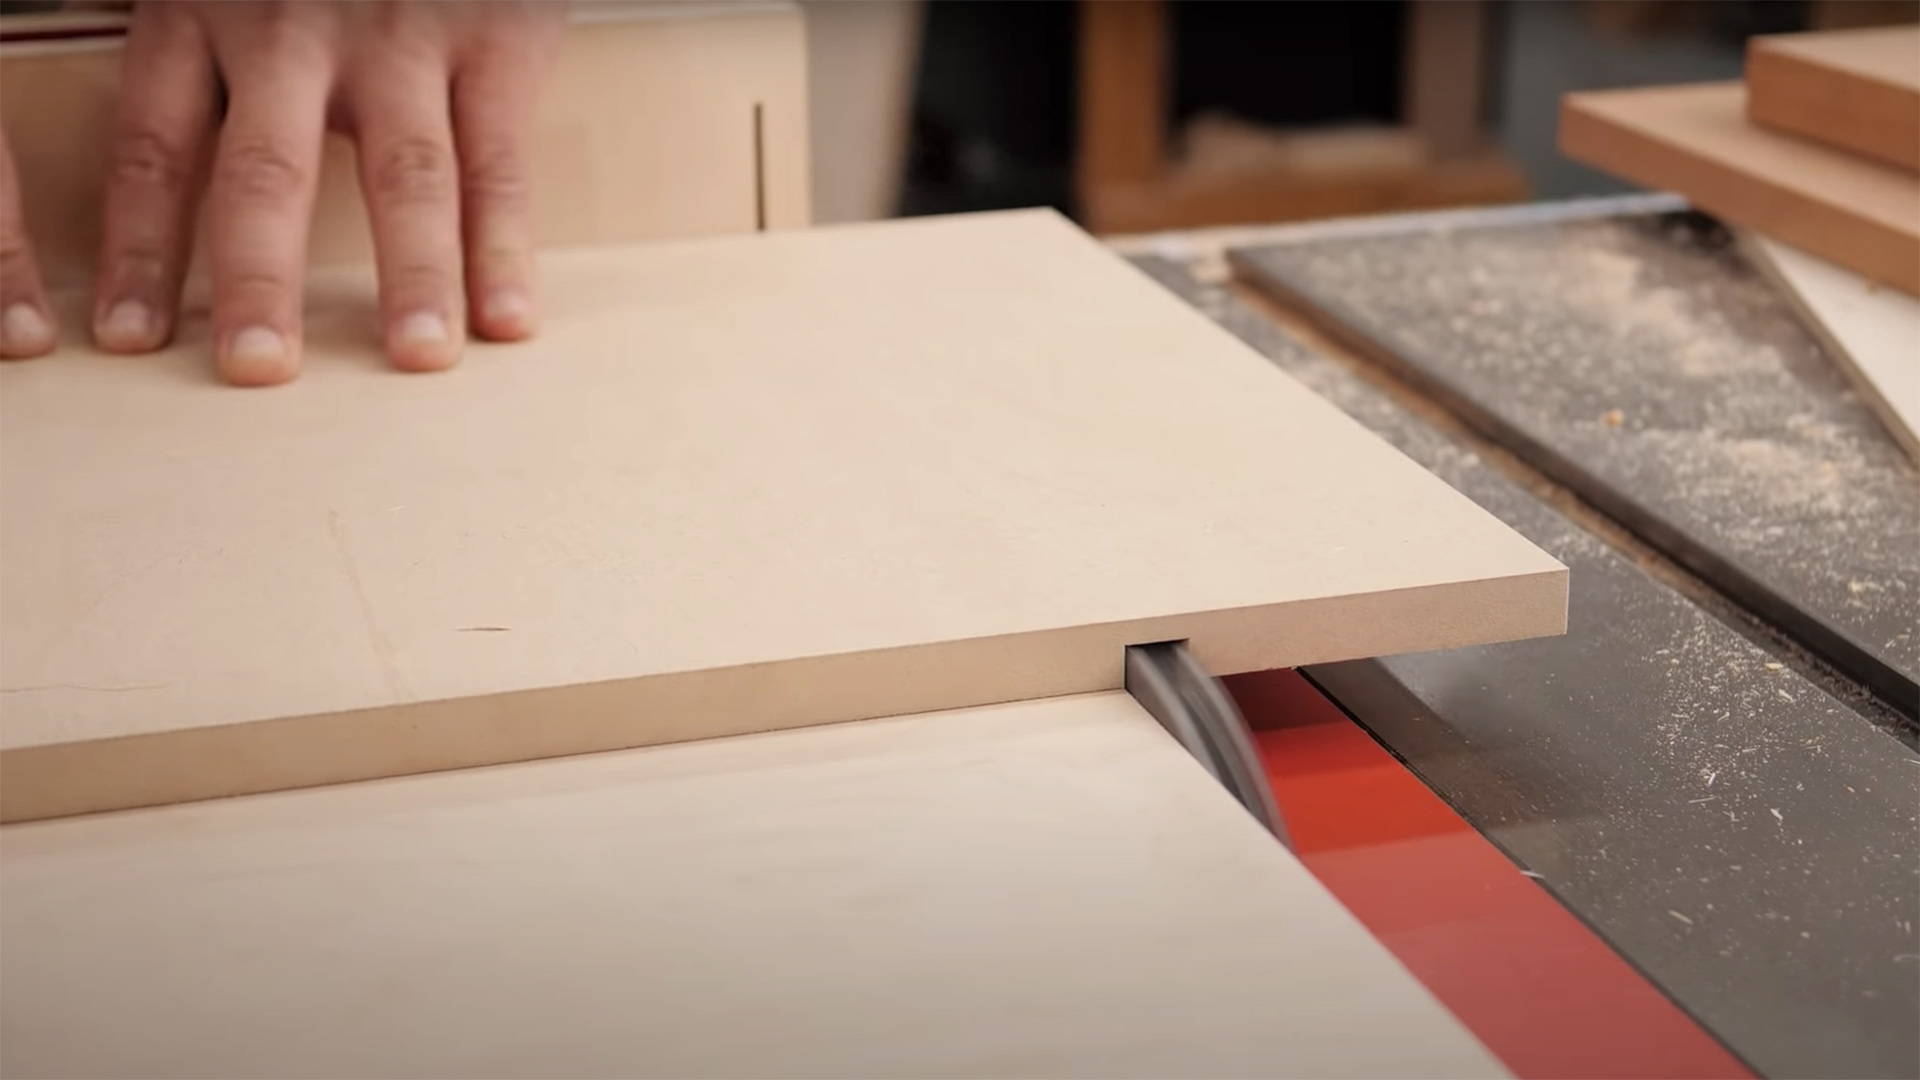 Cutting groove in shooting board base